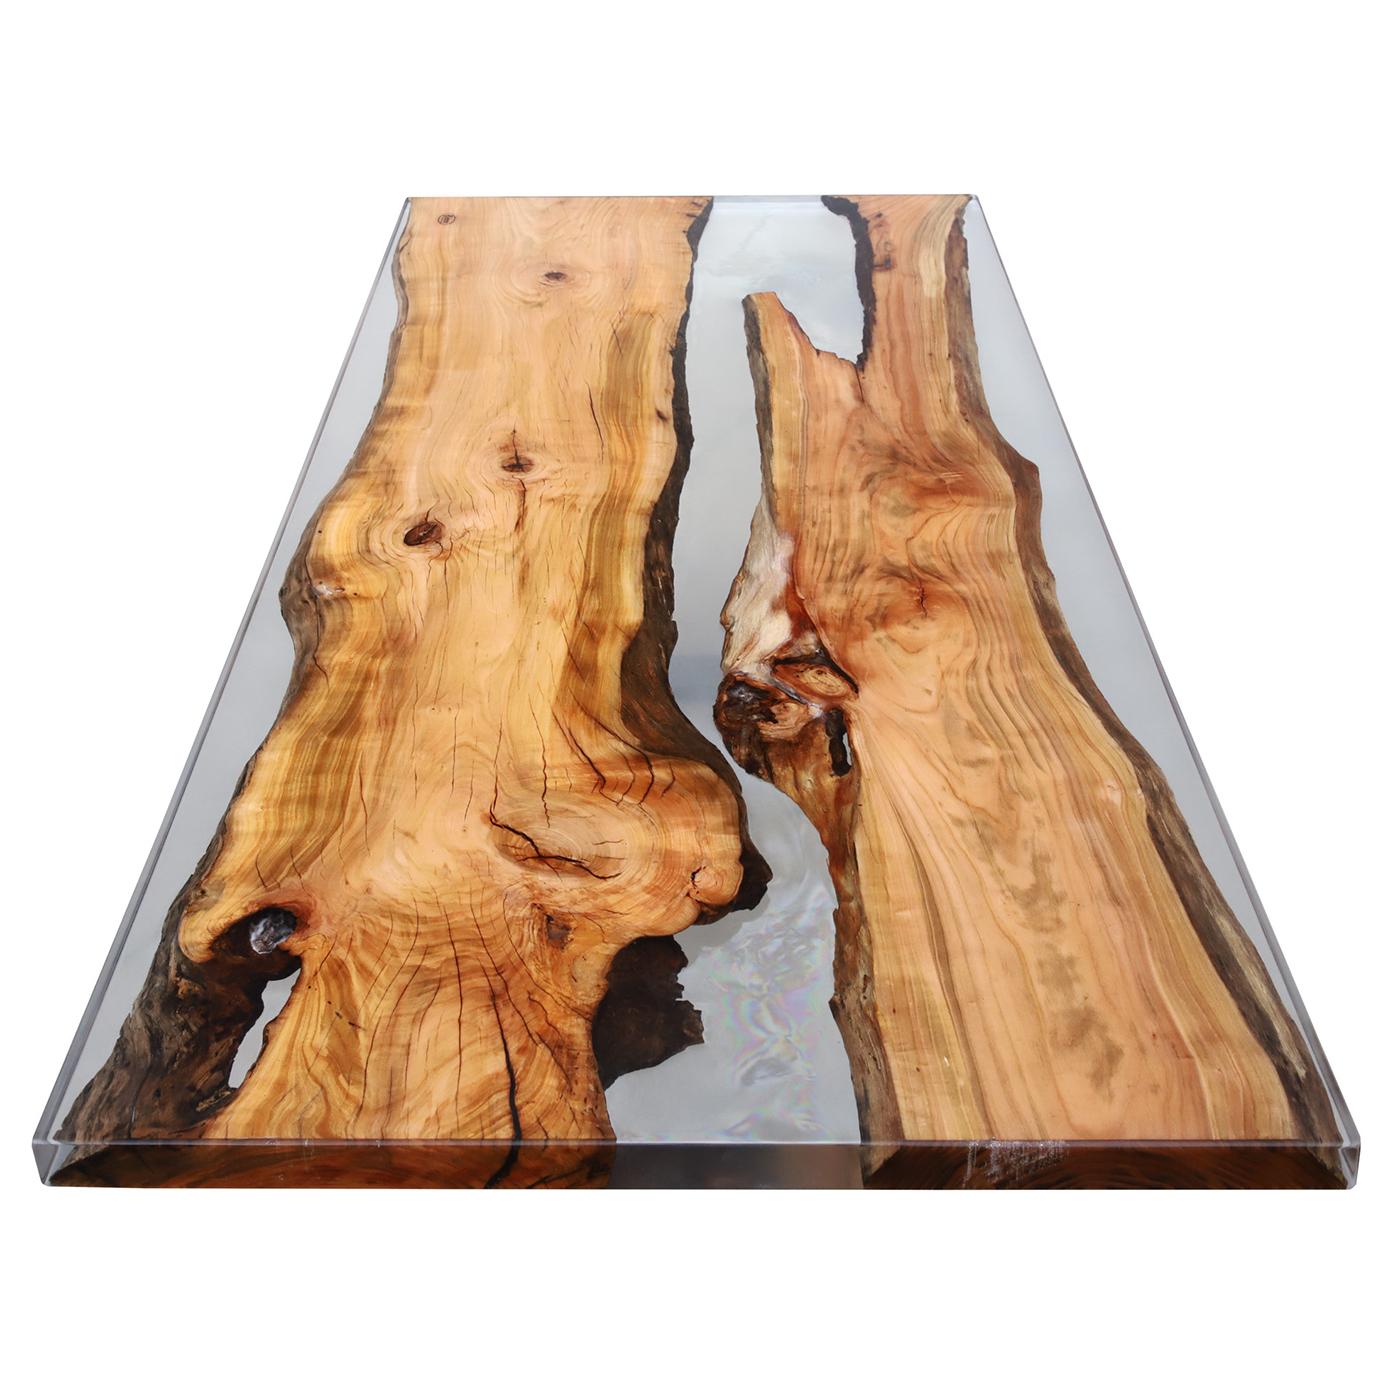 This very elegant dining table, also commonly known as Rivertable, is characterized by two chestnut wood boards, a central river of transparent resin that crosses them and gunmetal gray finished legs. The product lends itself to be customized